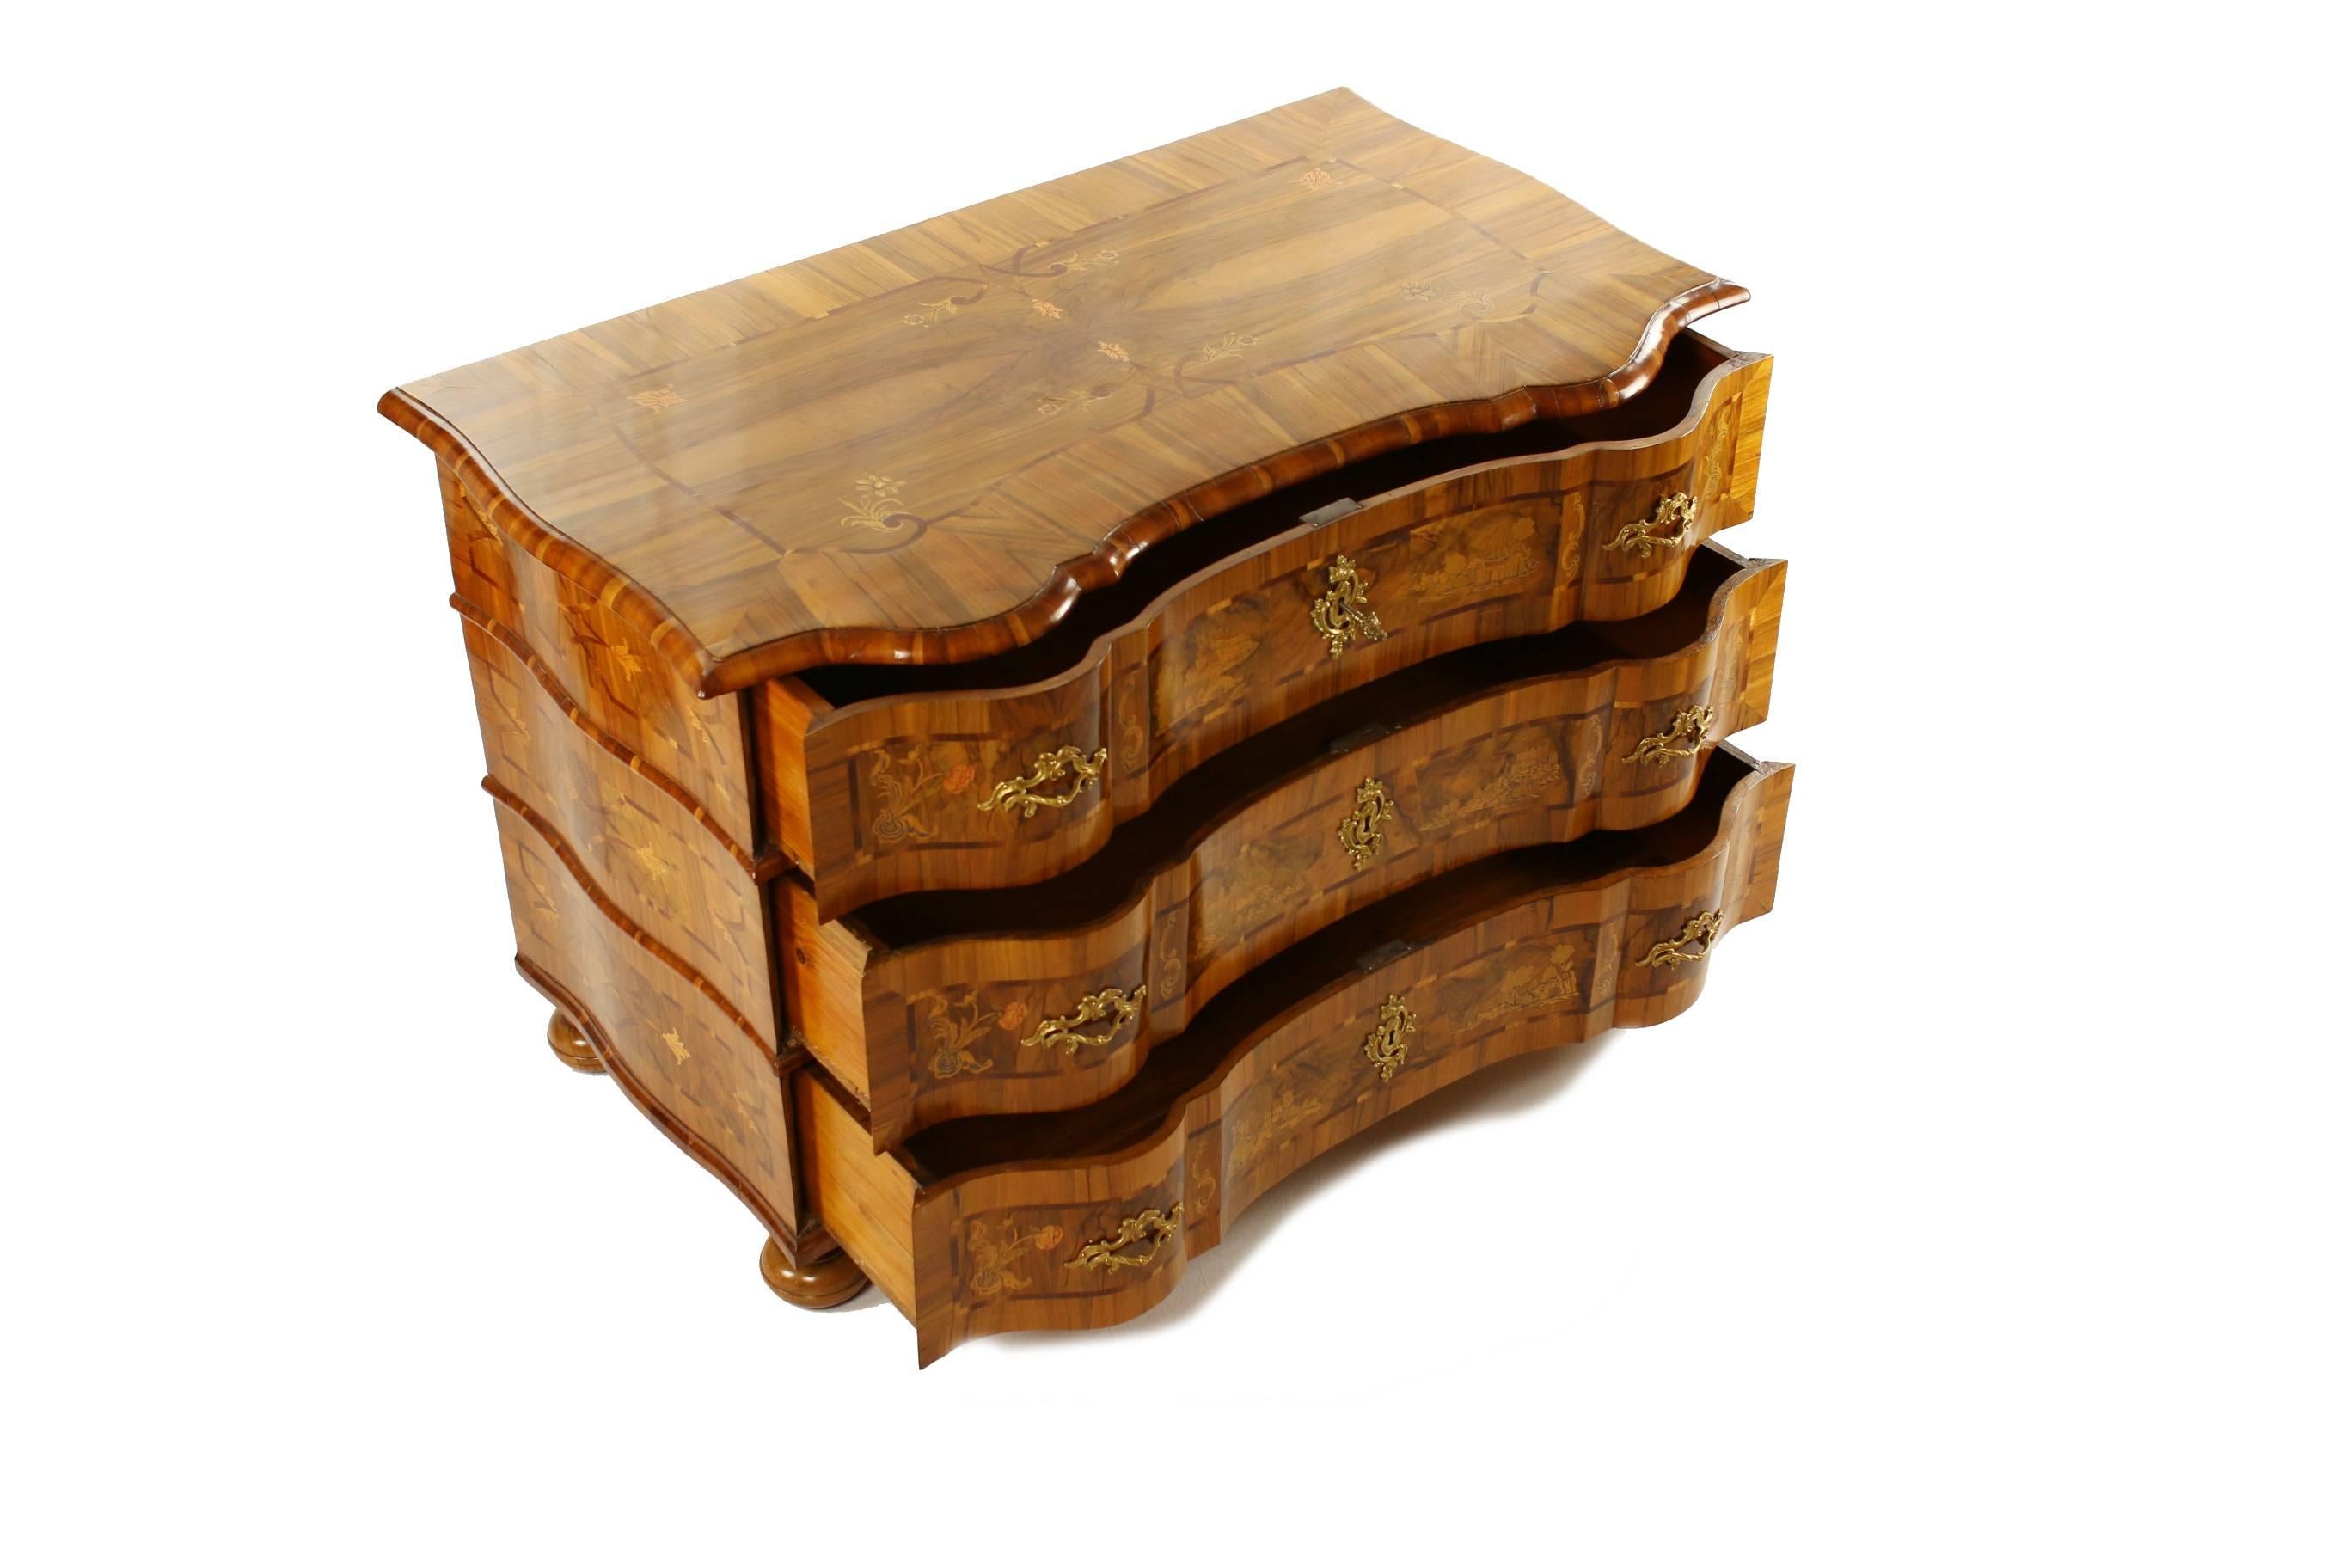 Baroque Chest of Drawers, Erfurt, circa 1750, Nut and Root Wood, Inlaid Works 1